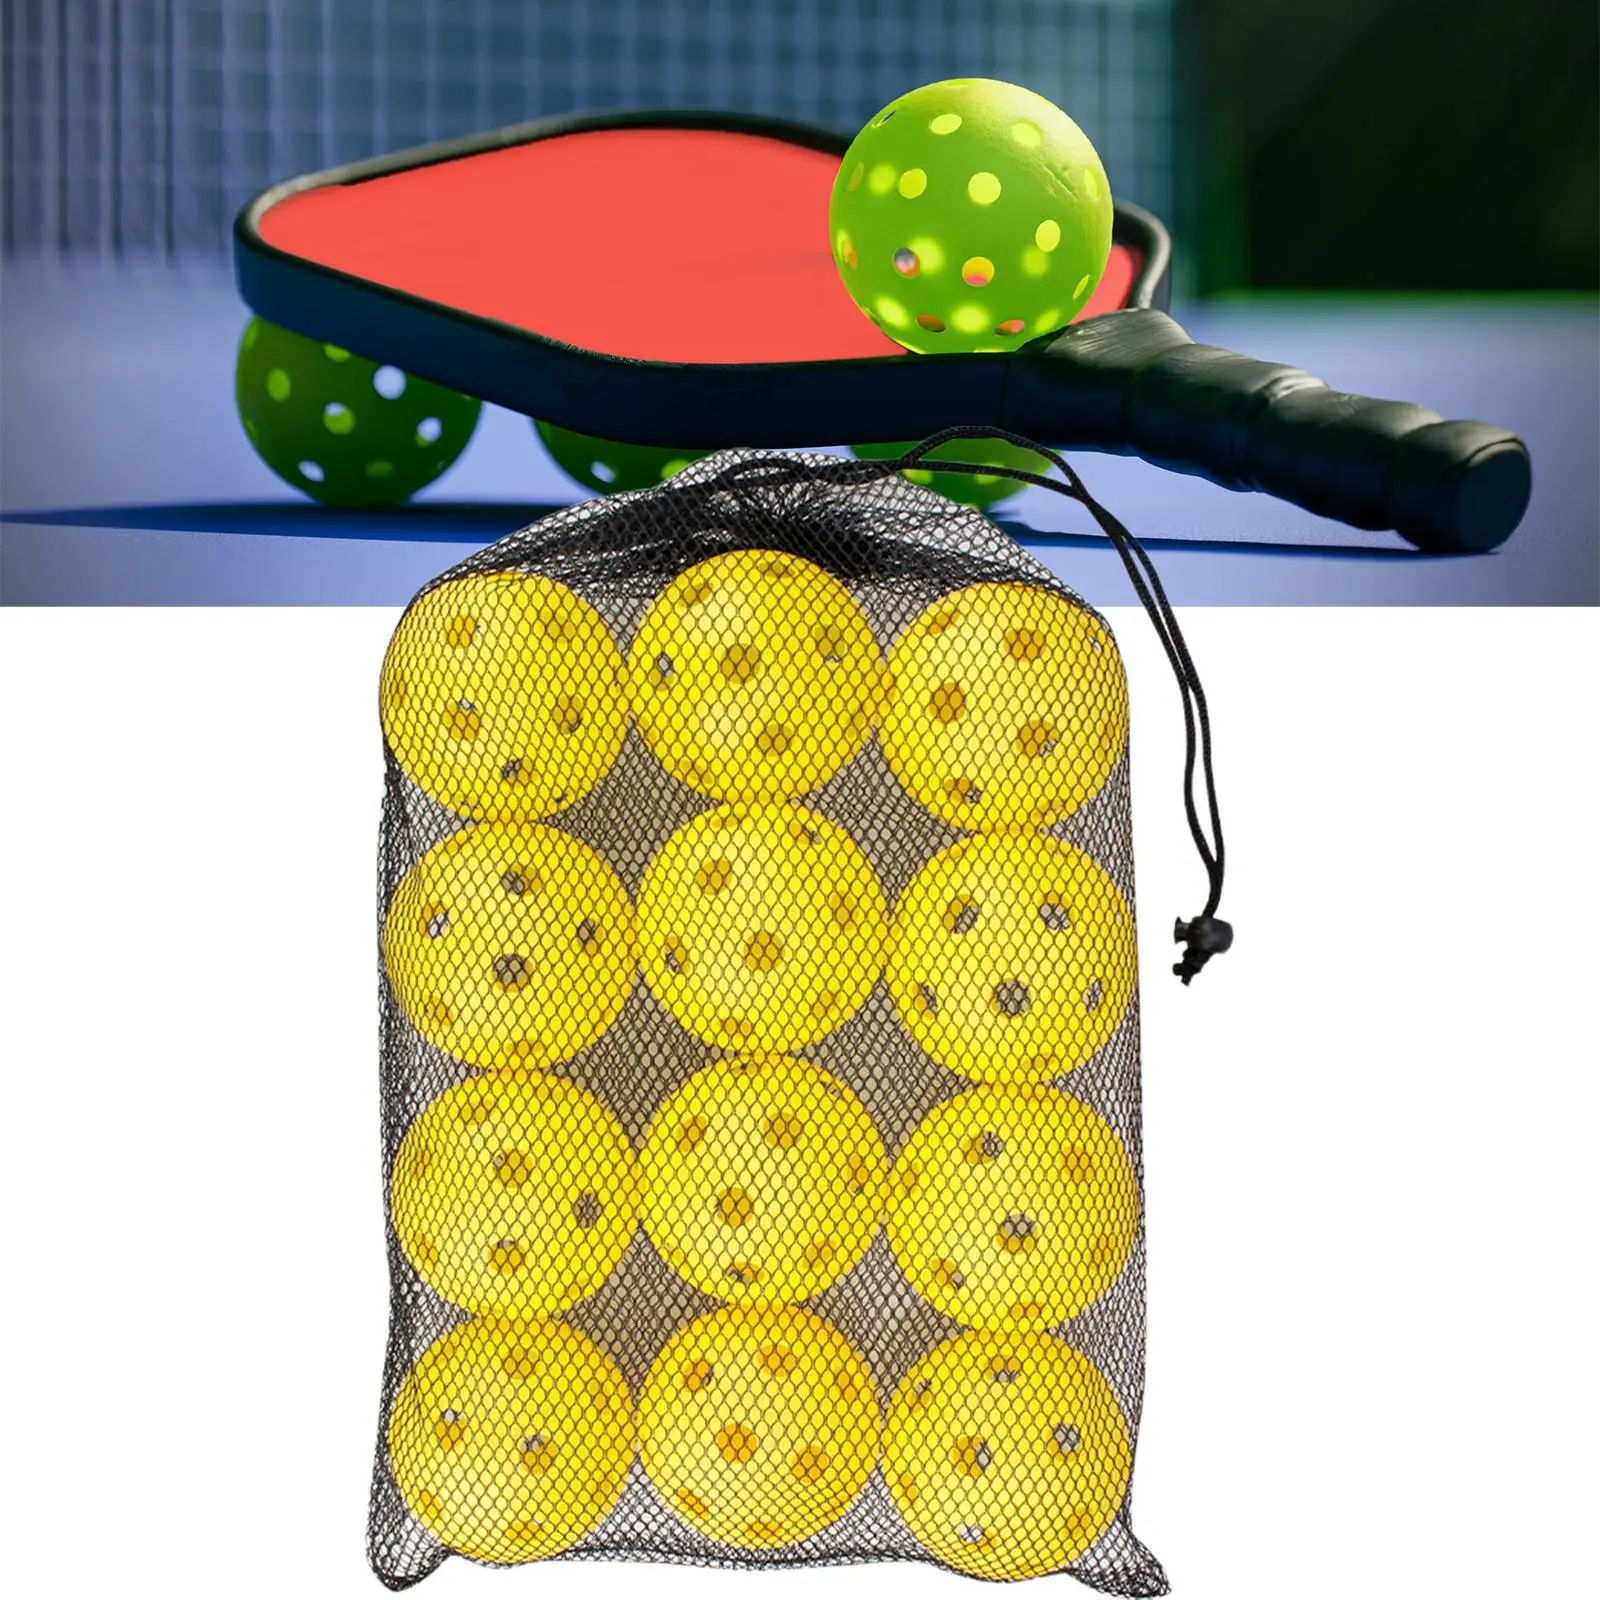 12 Pieces Professional Quality Standard Pickleballs Specially Designed Golf Ball